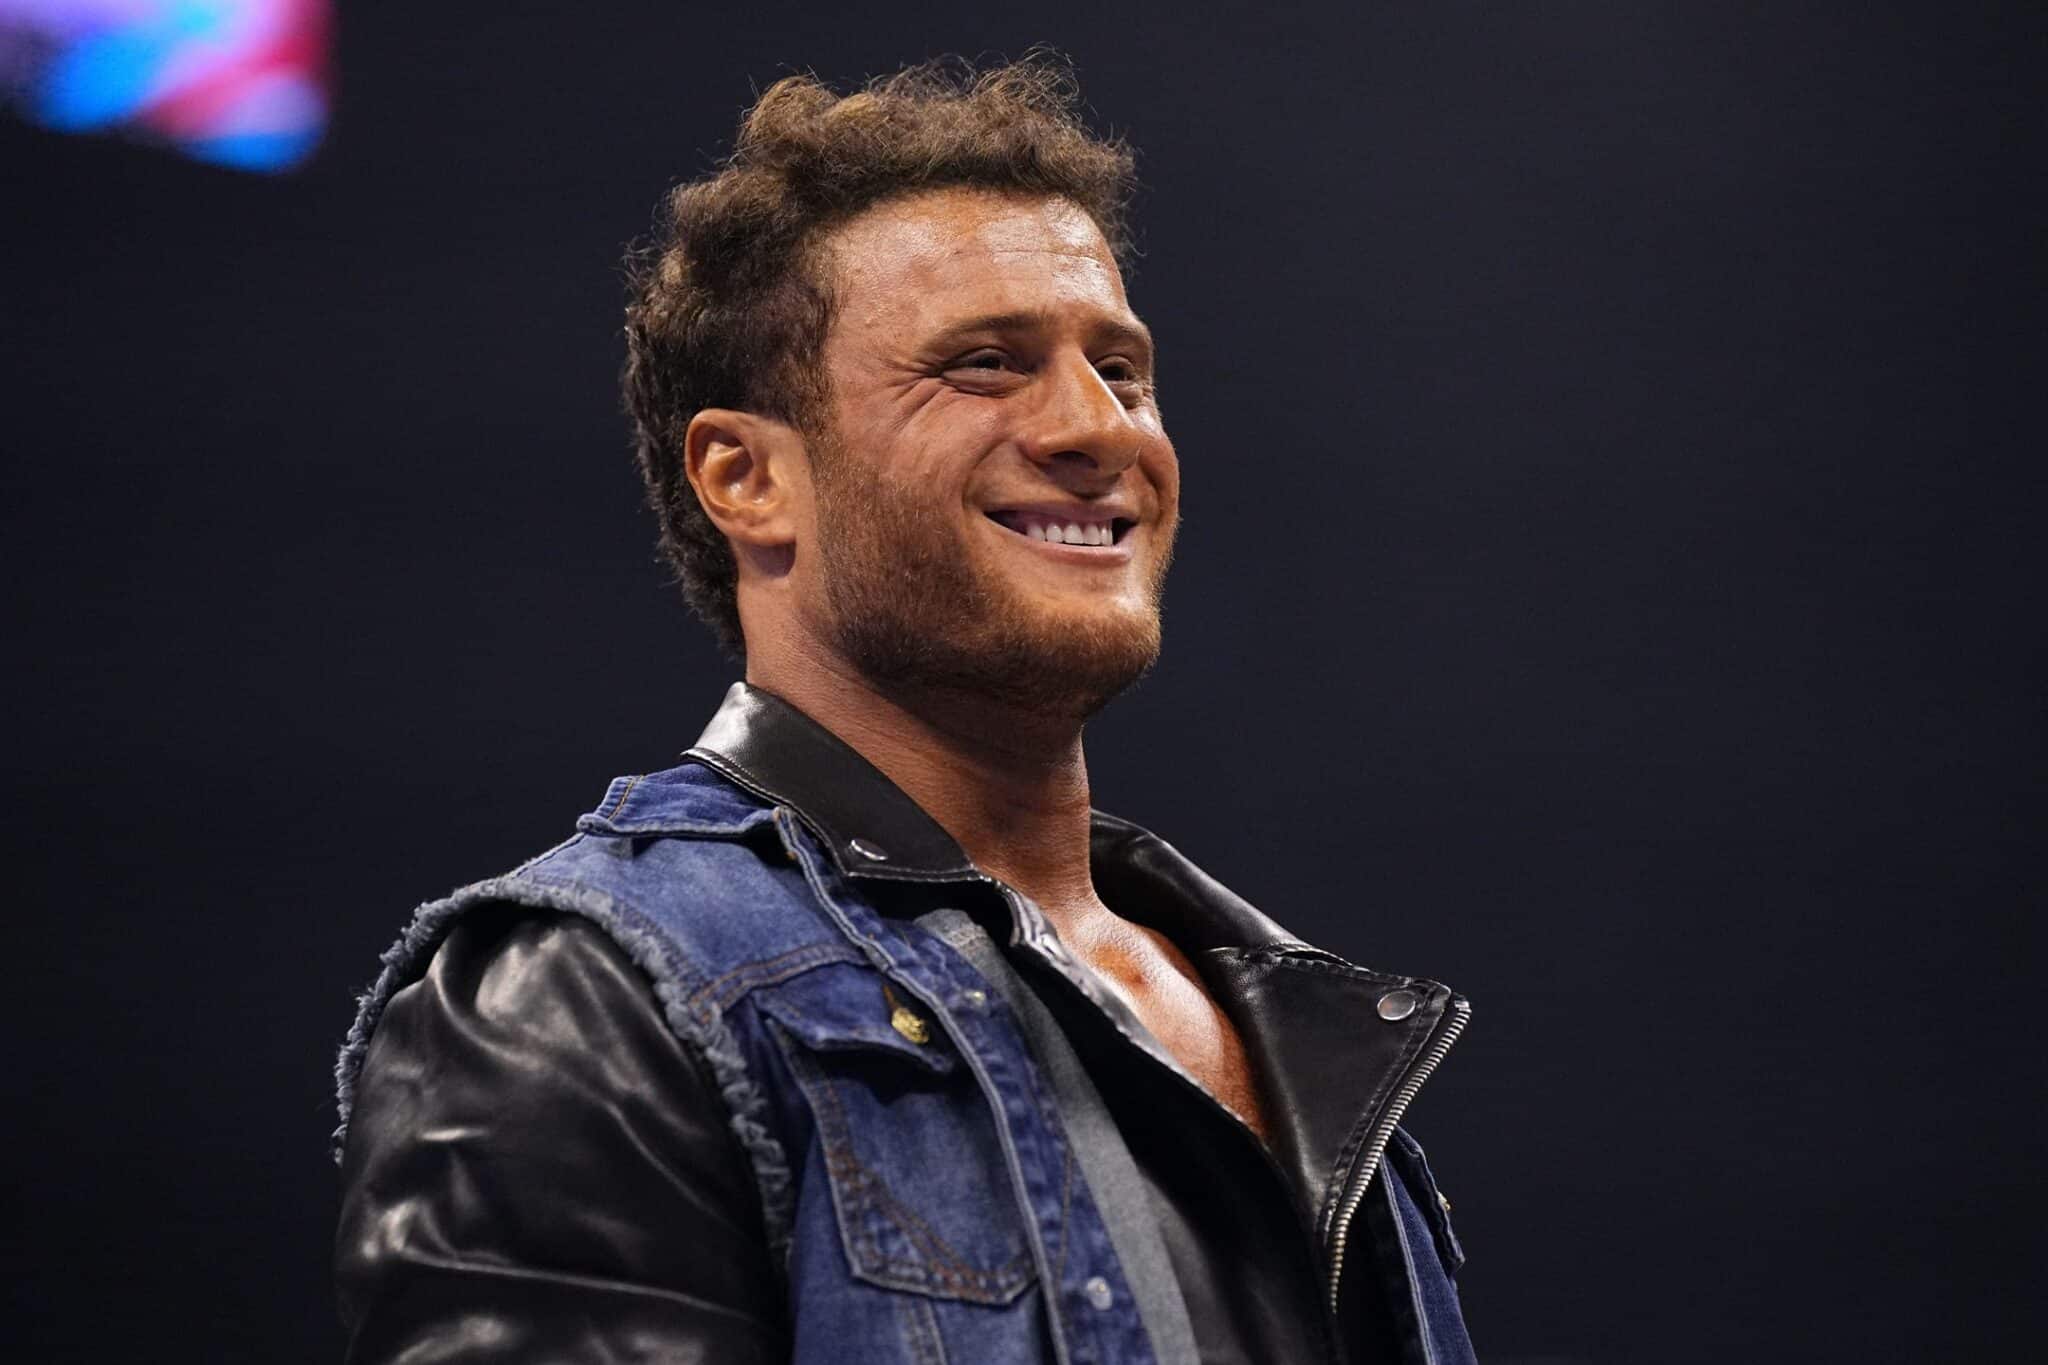 MJF Scheduled for the 7/6 AEW Dynamite Episode, Agenda for the Upcoming Week’s Dynamite Edition, and More Details